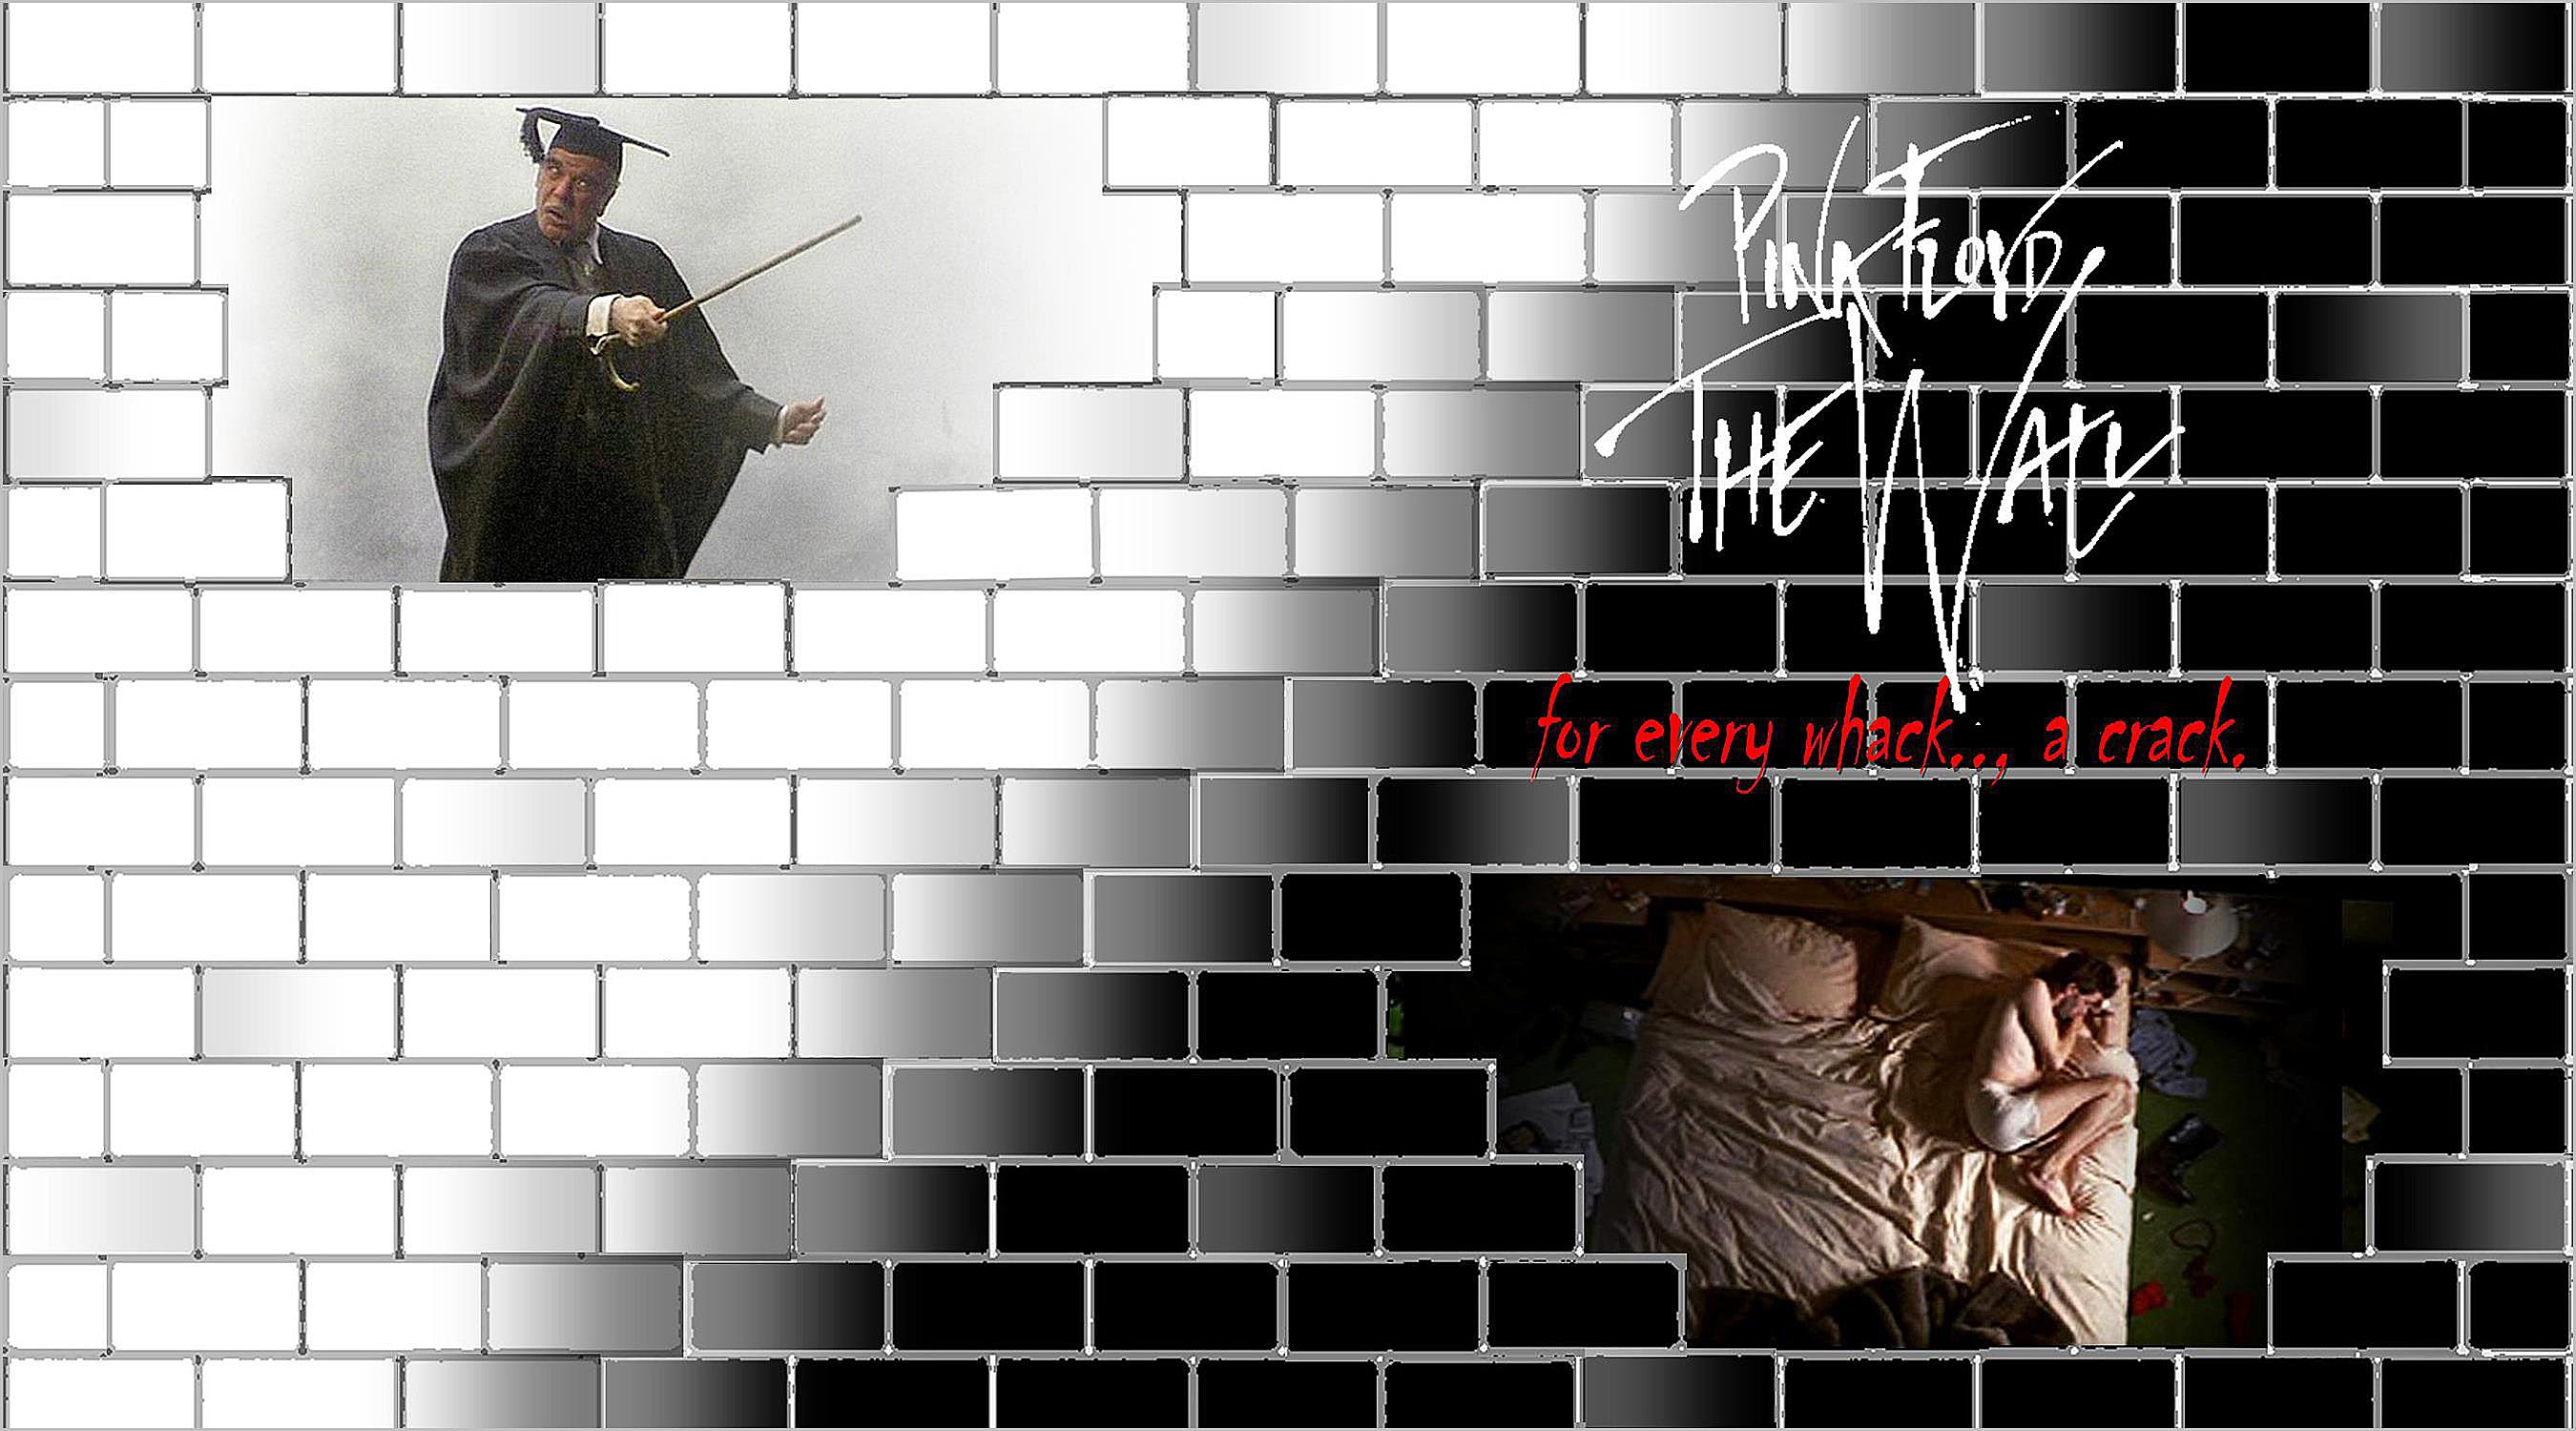 Pink Floyd The Wall Wallpapers on WallpaperGet